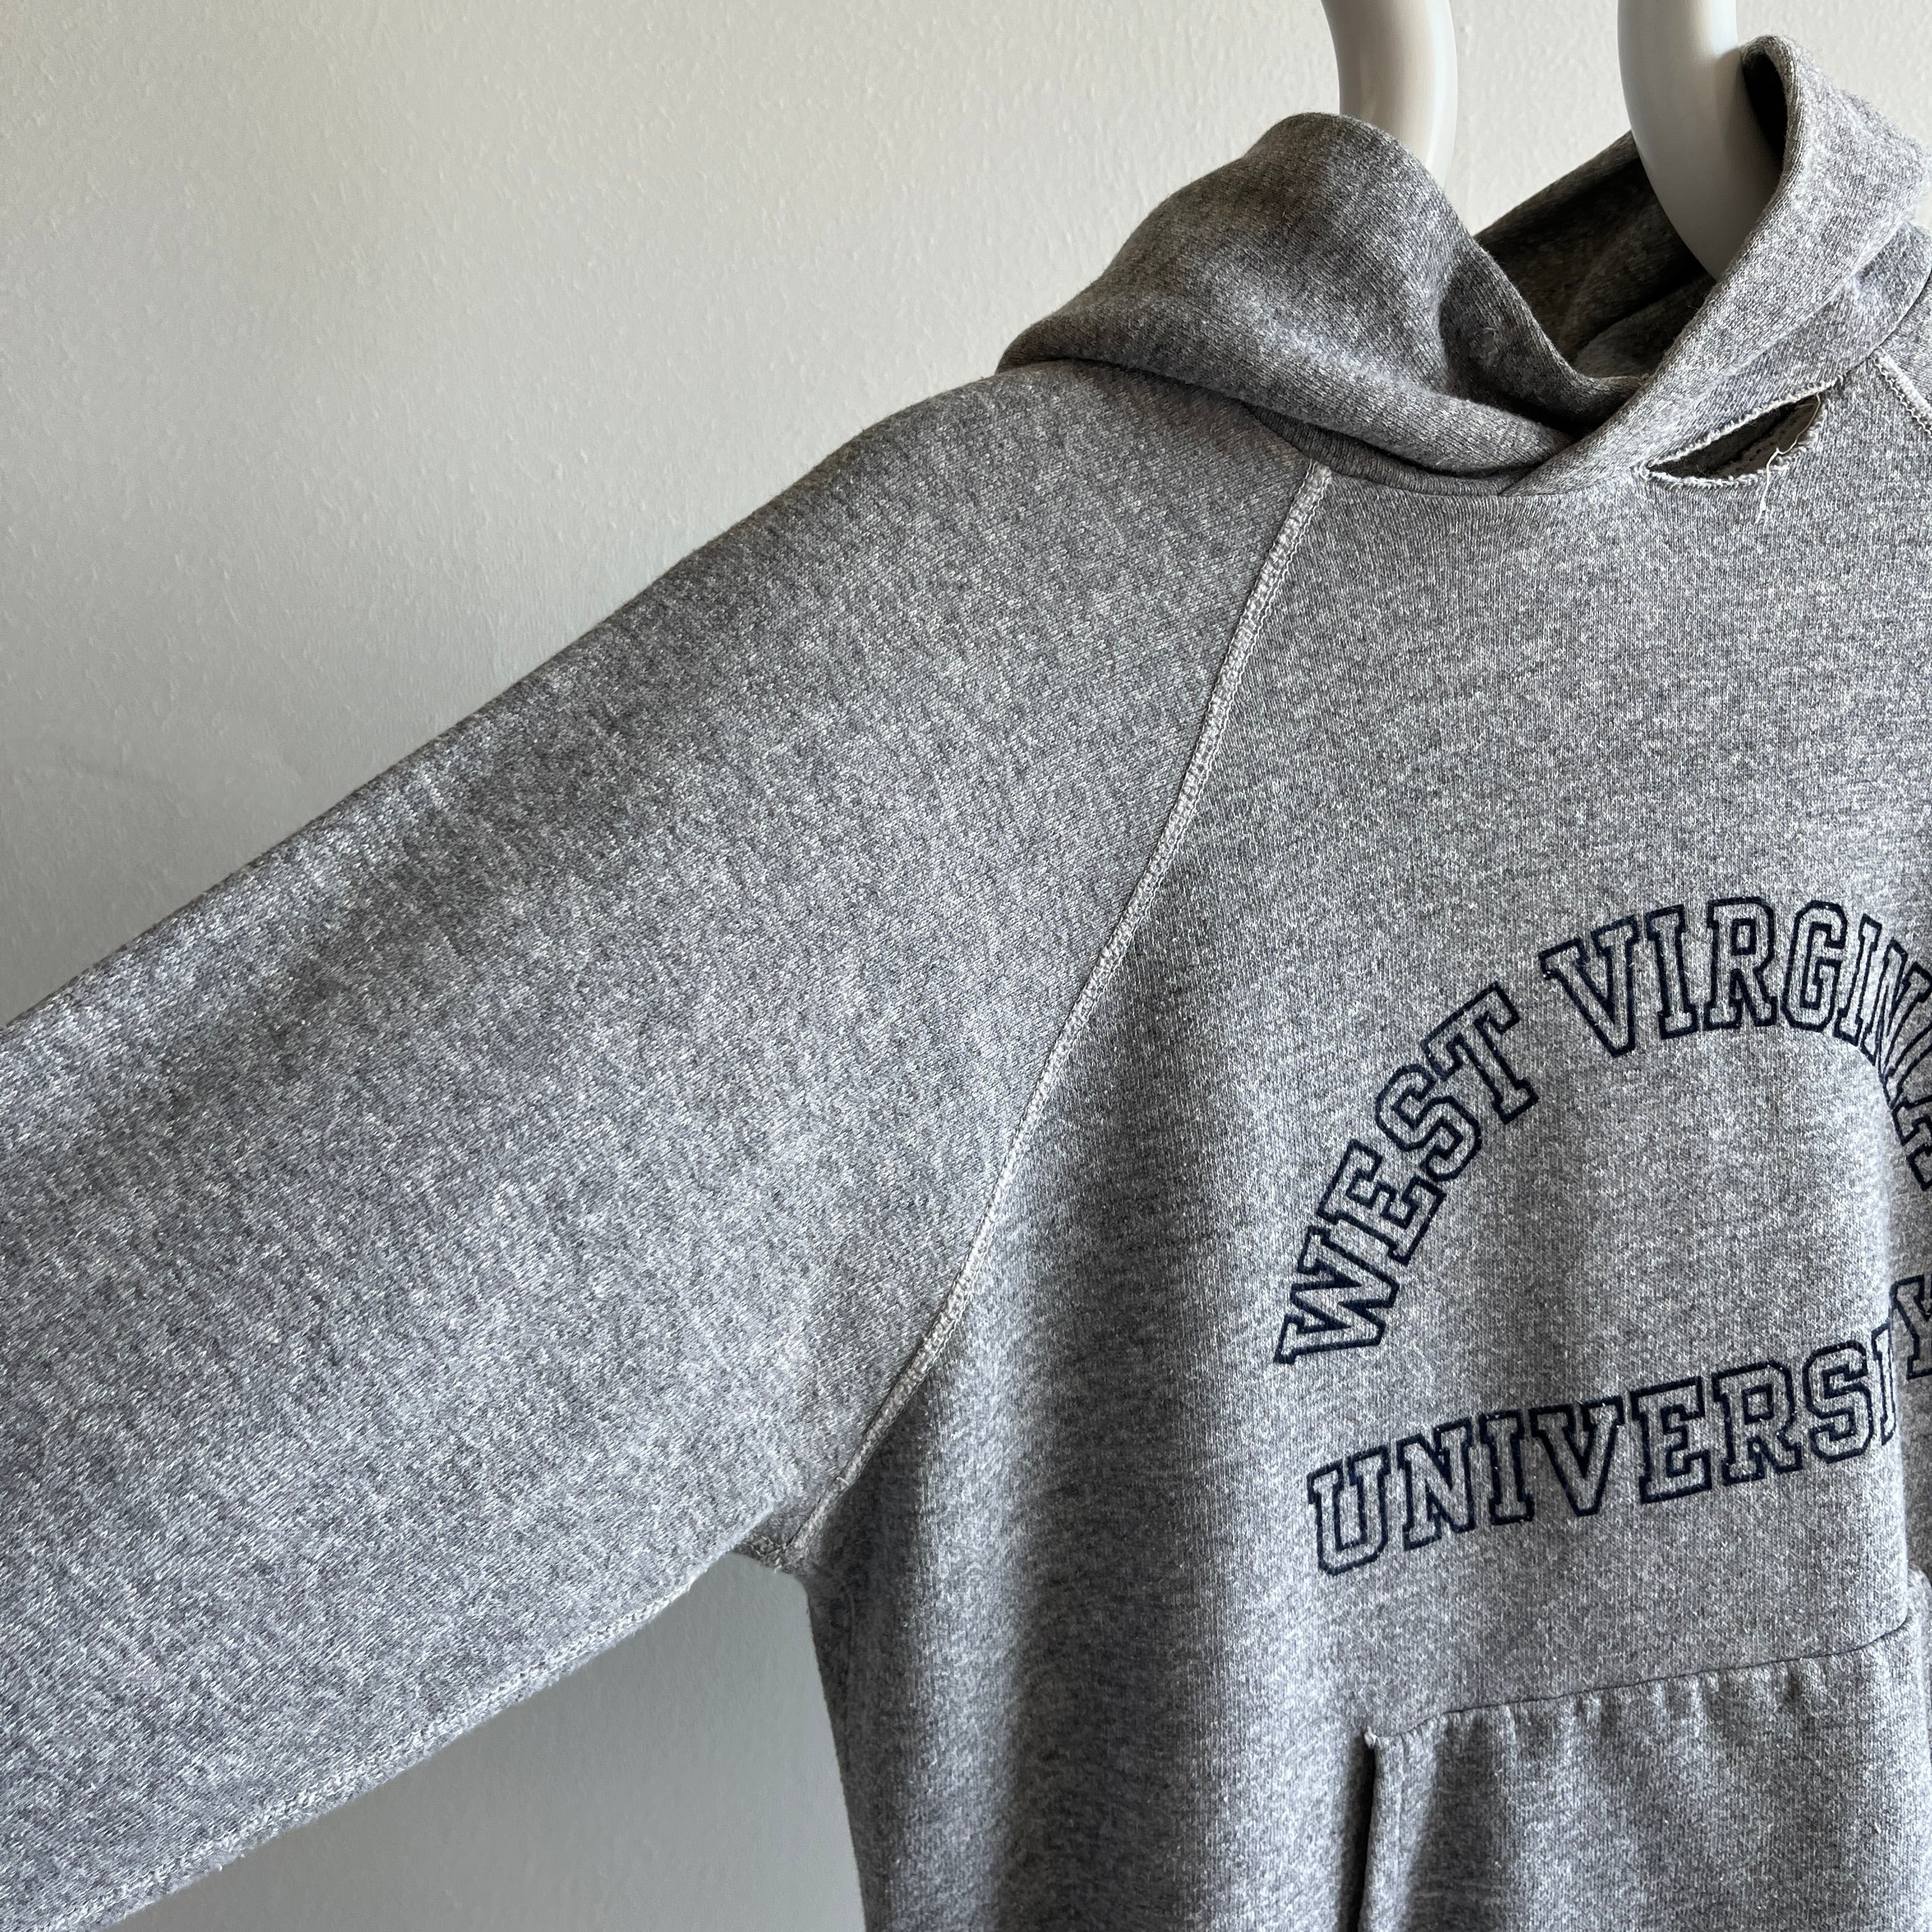 1970/80s University of West Virginia Velva Sheen Hoodie - Tattered, Torn and Grease Stained